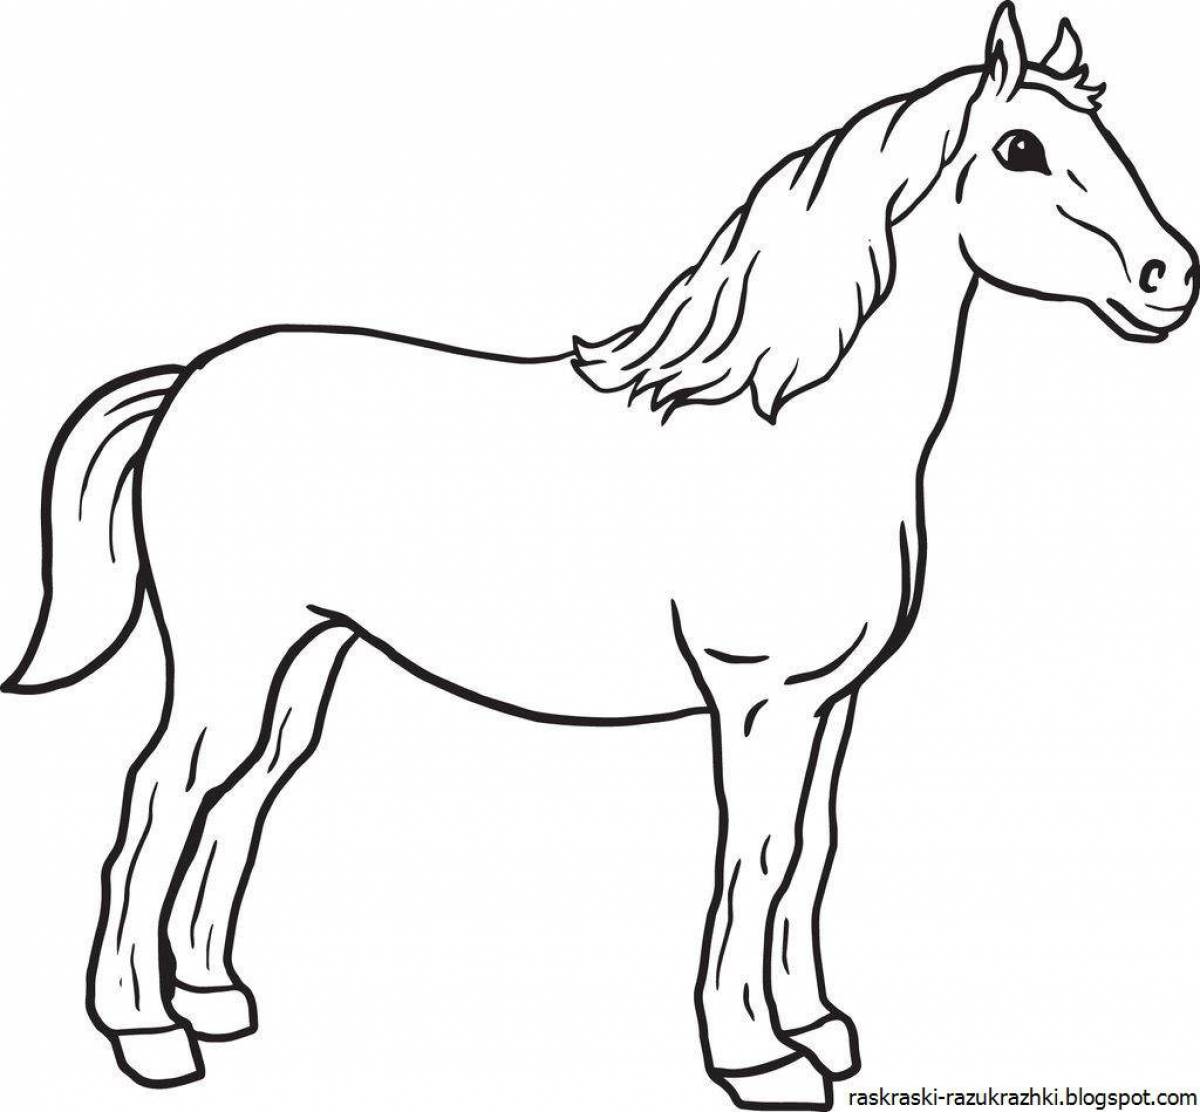 Majestic paint coloring page horse